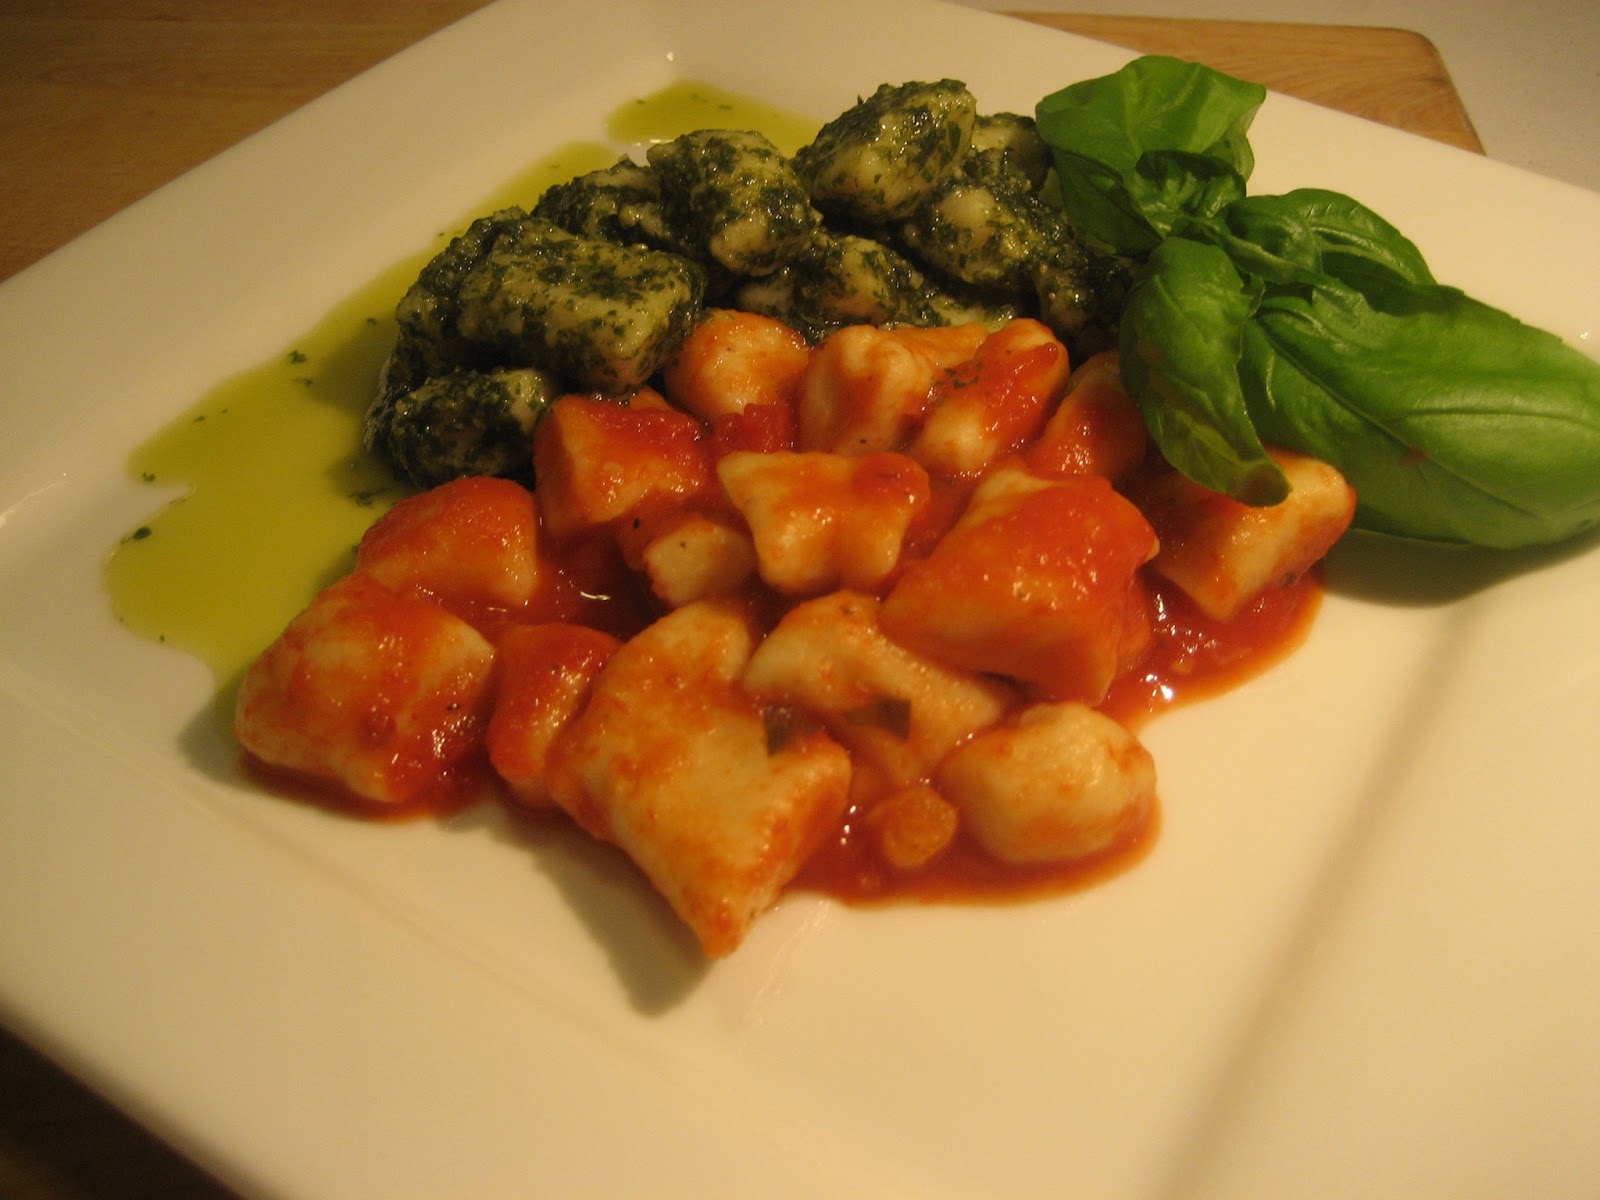 BLOG BY BINNS: Homemade Gnocchi and Meatballs